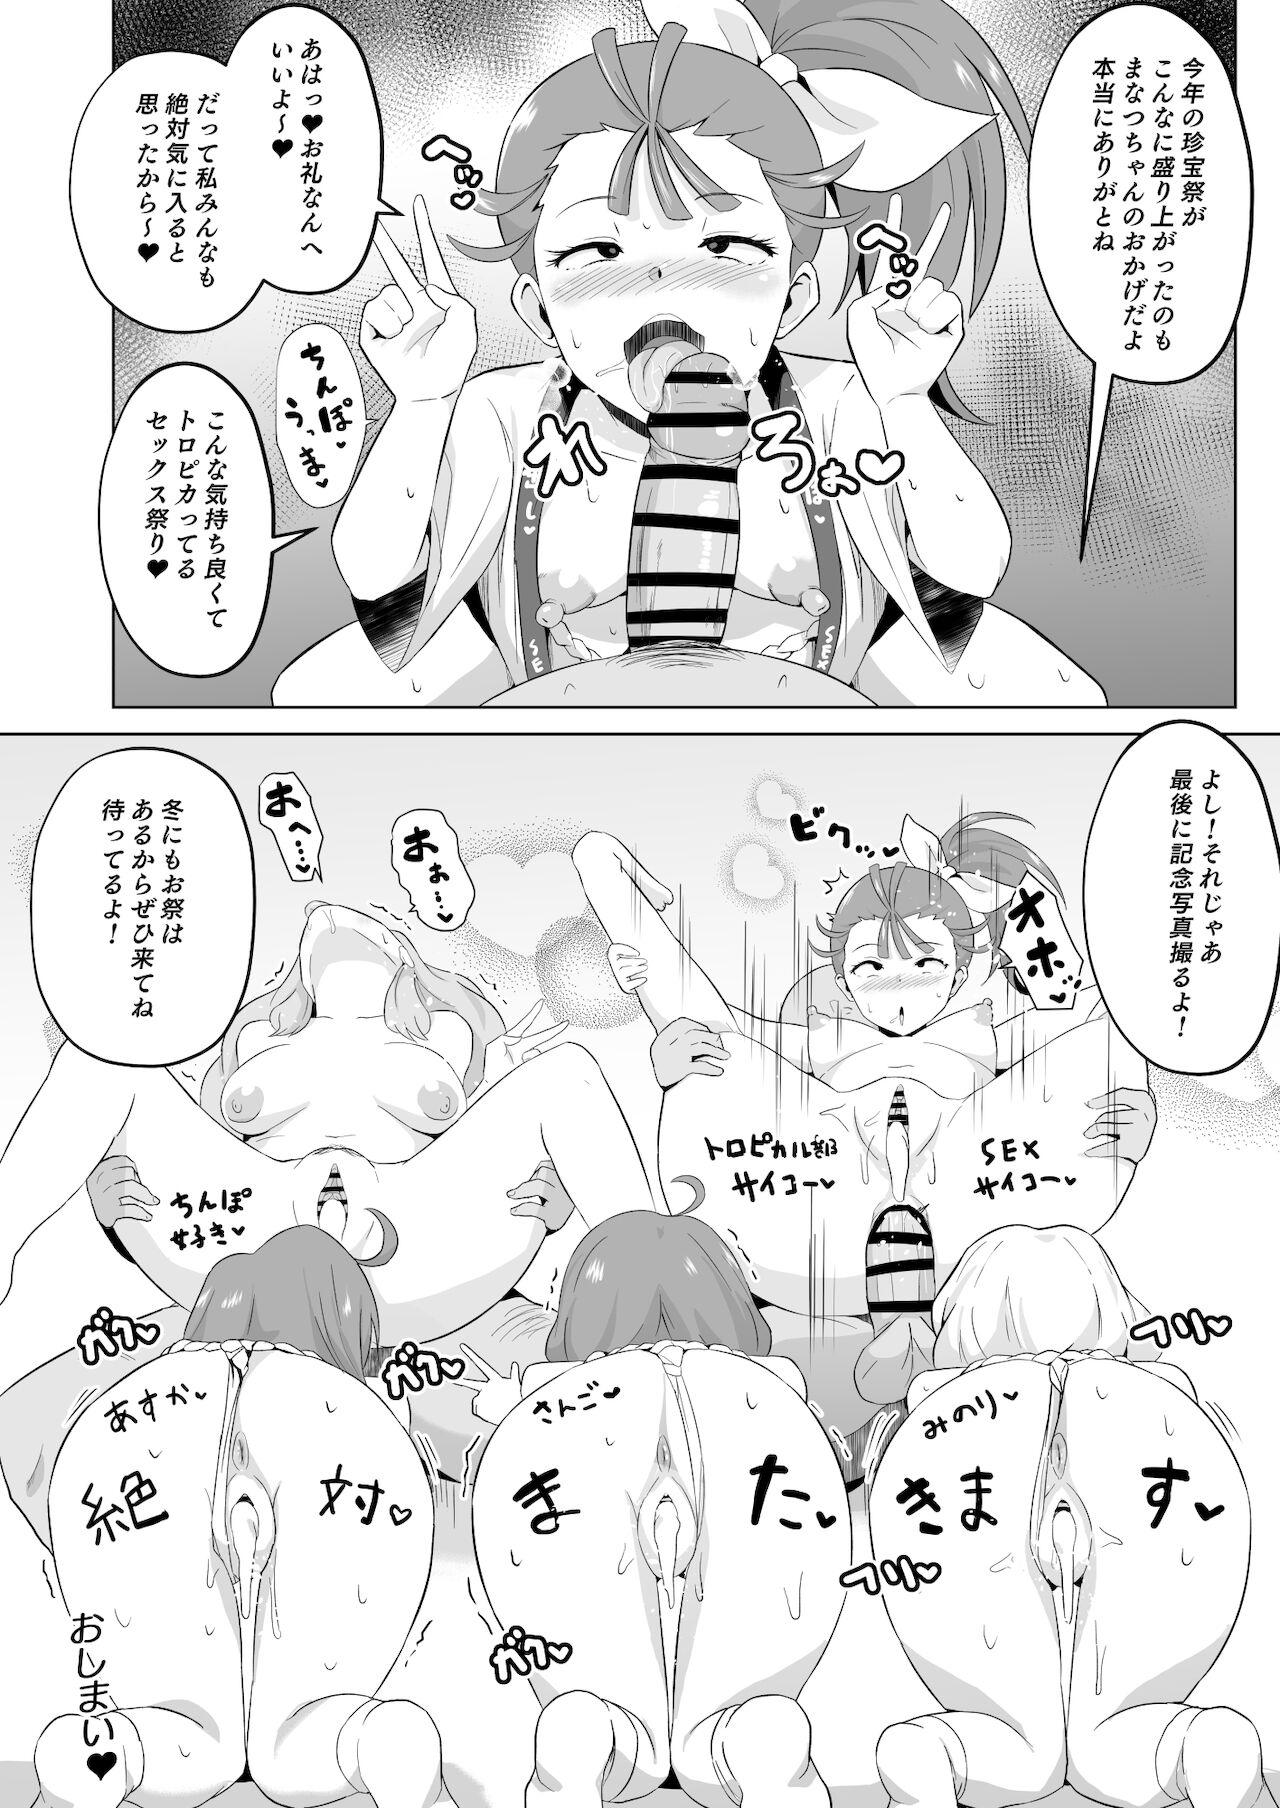 Amature Porn トロプリ漫画 - Tropical rouge precure Nerd - Page 5